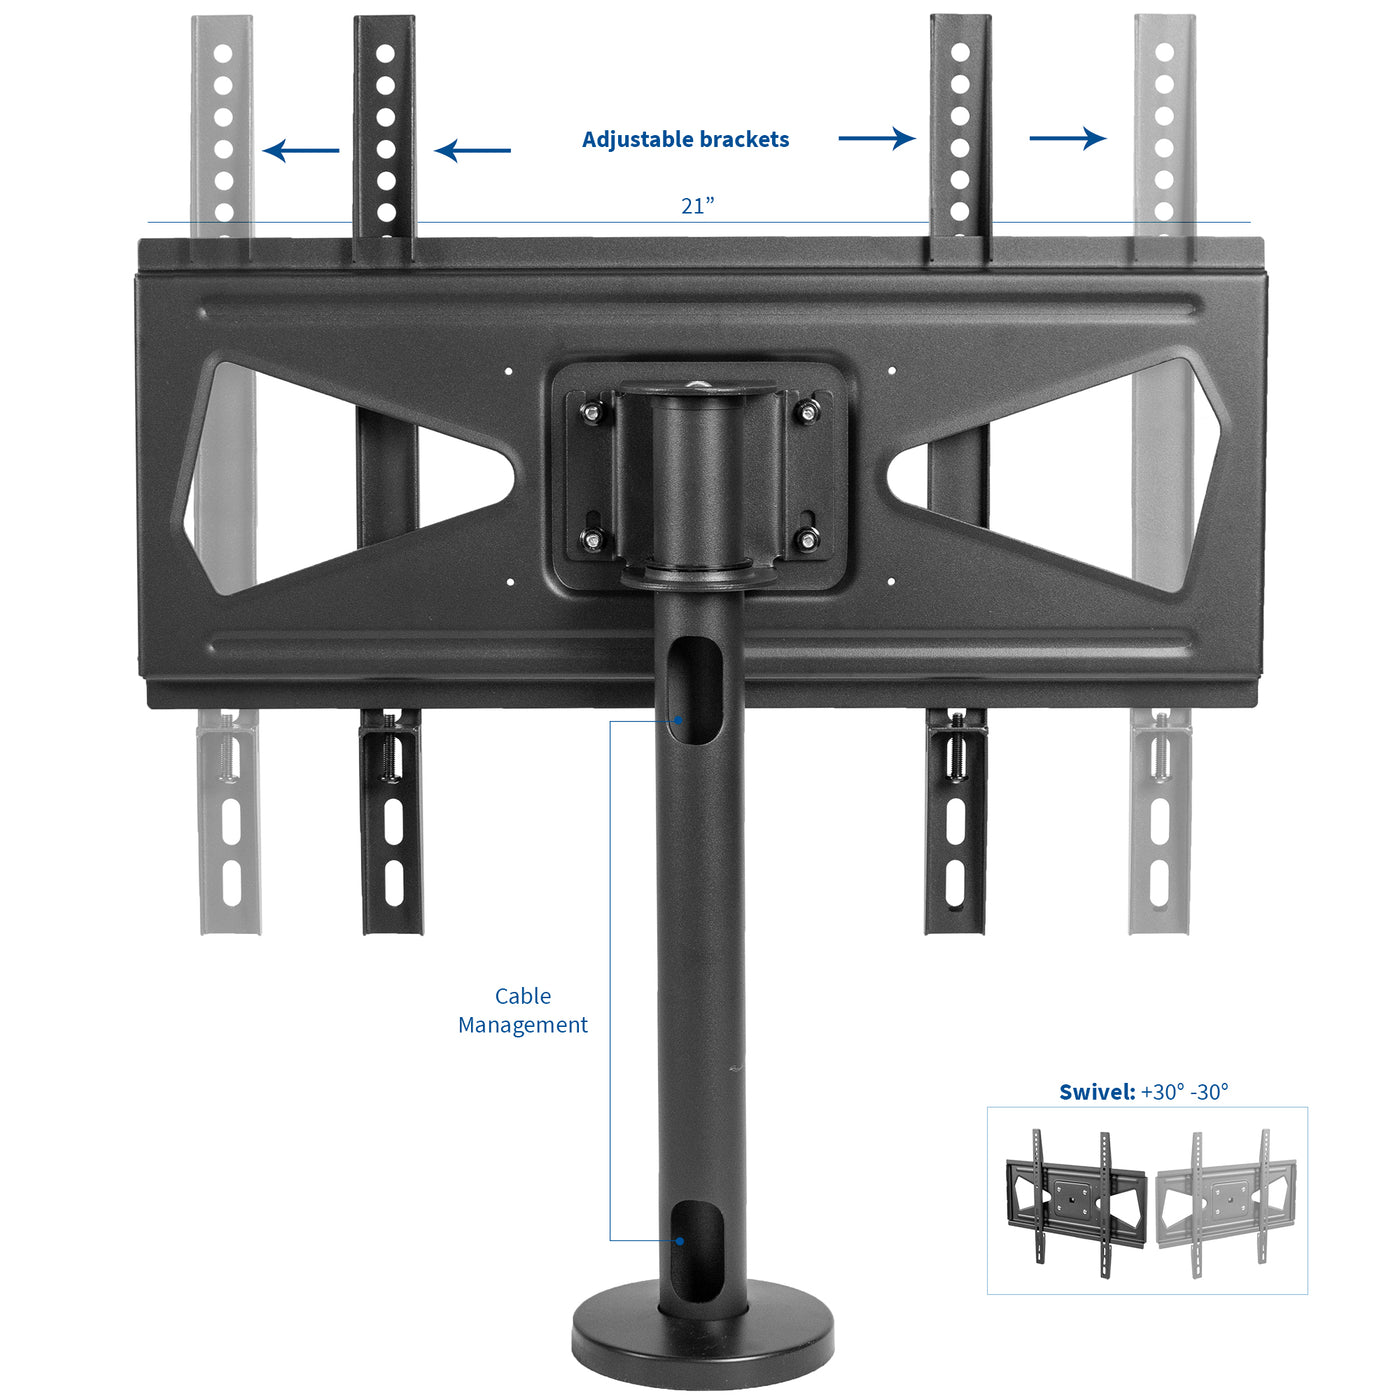 Sturdy bolt-down TV mount with adjustable brackets and swivel.